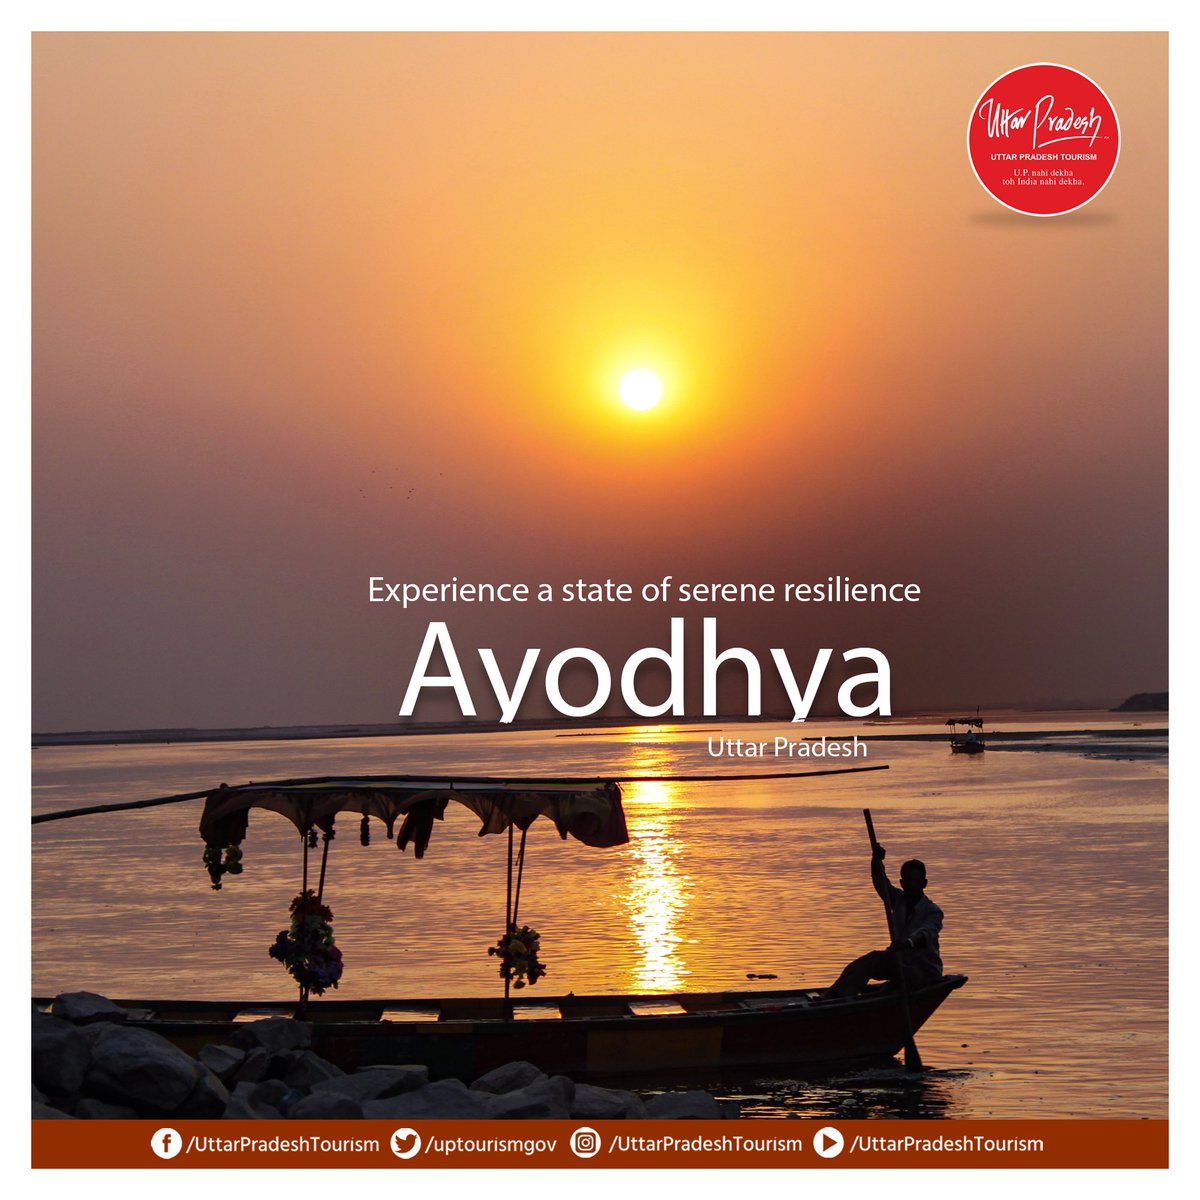 Find your peace in the heart of #Ayodhya, #UttarPradesh. Experience a state of serene resilience amidst its sacred sites and timeless history. #UPTourism #UttarPradesh @MukeshMeshram